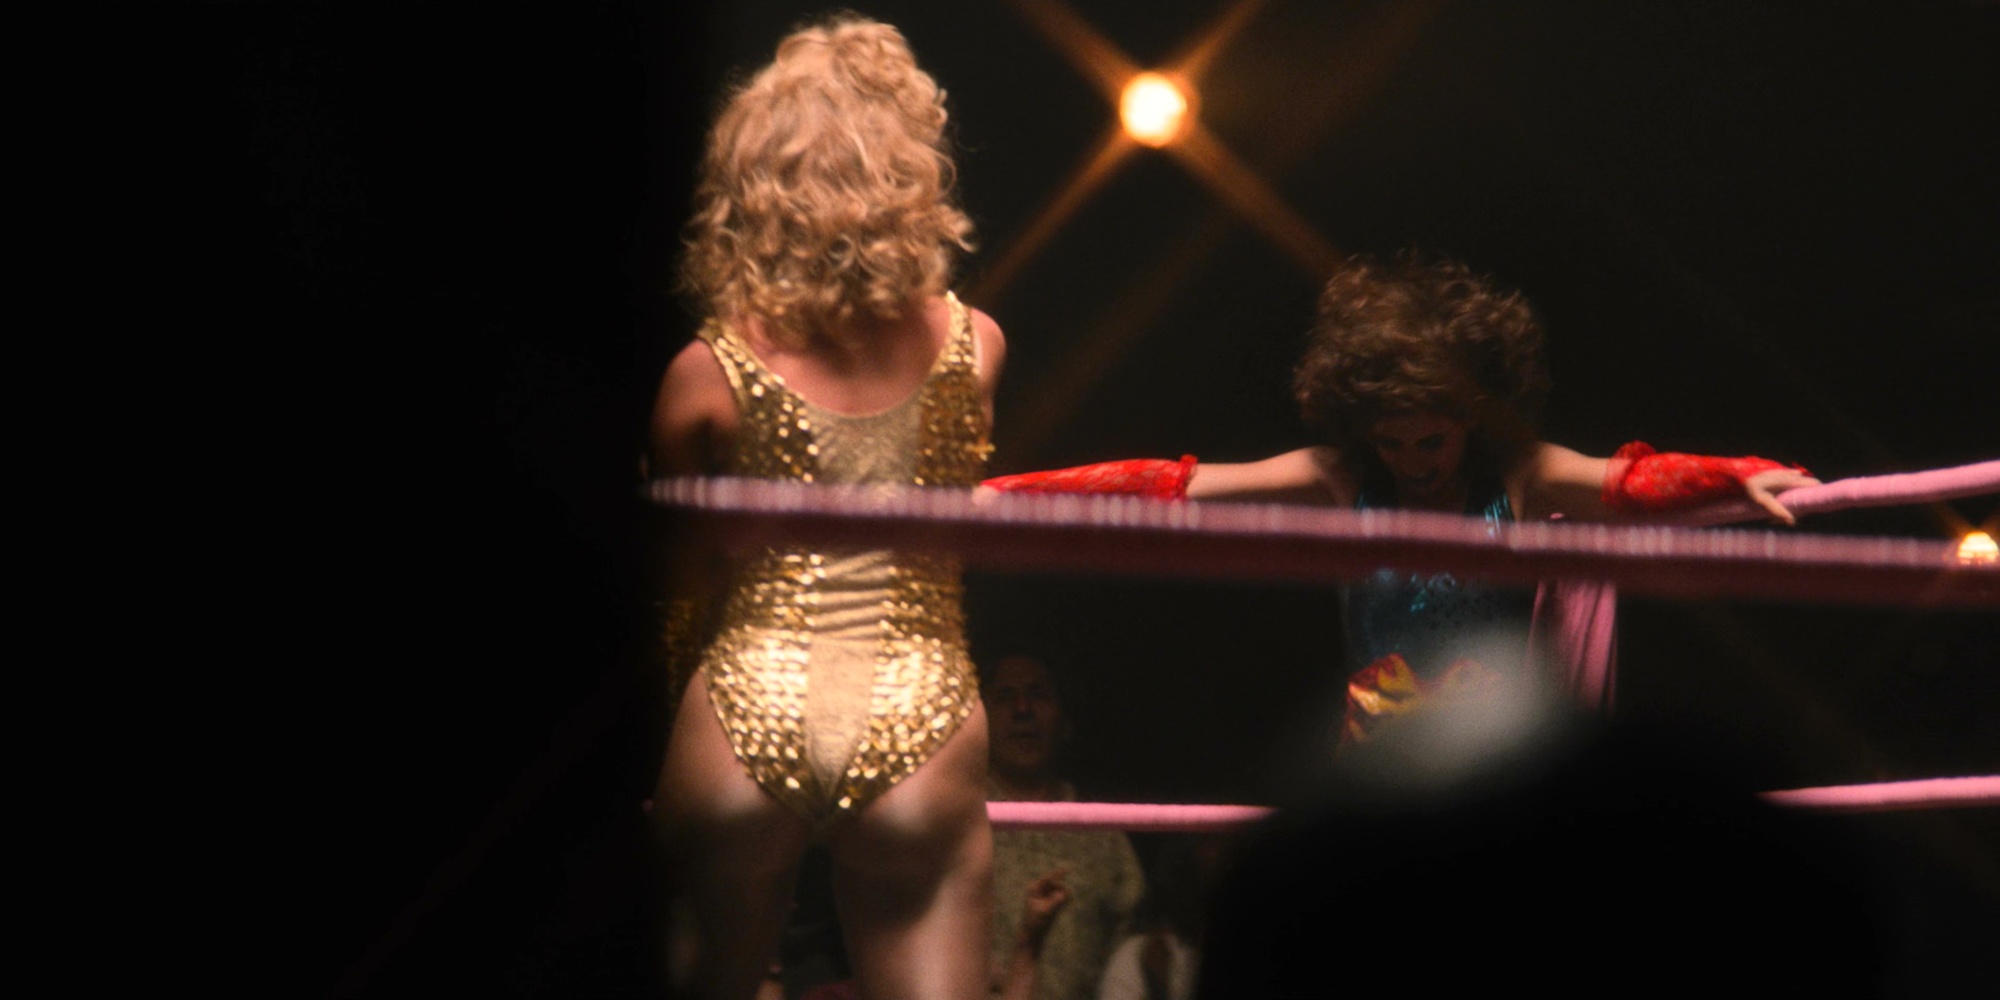 Naked Betty Gilpin In Glow